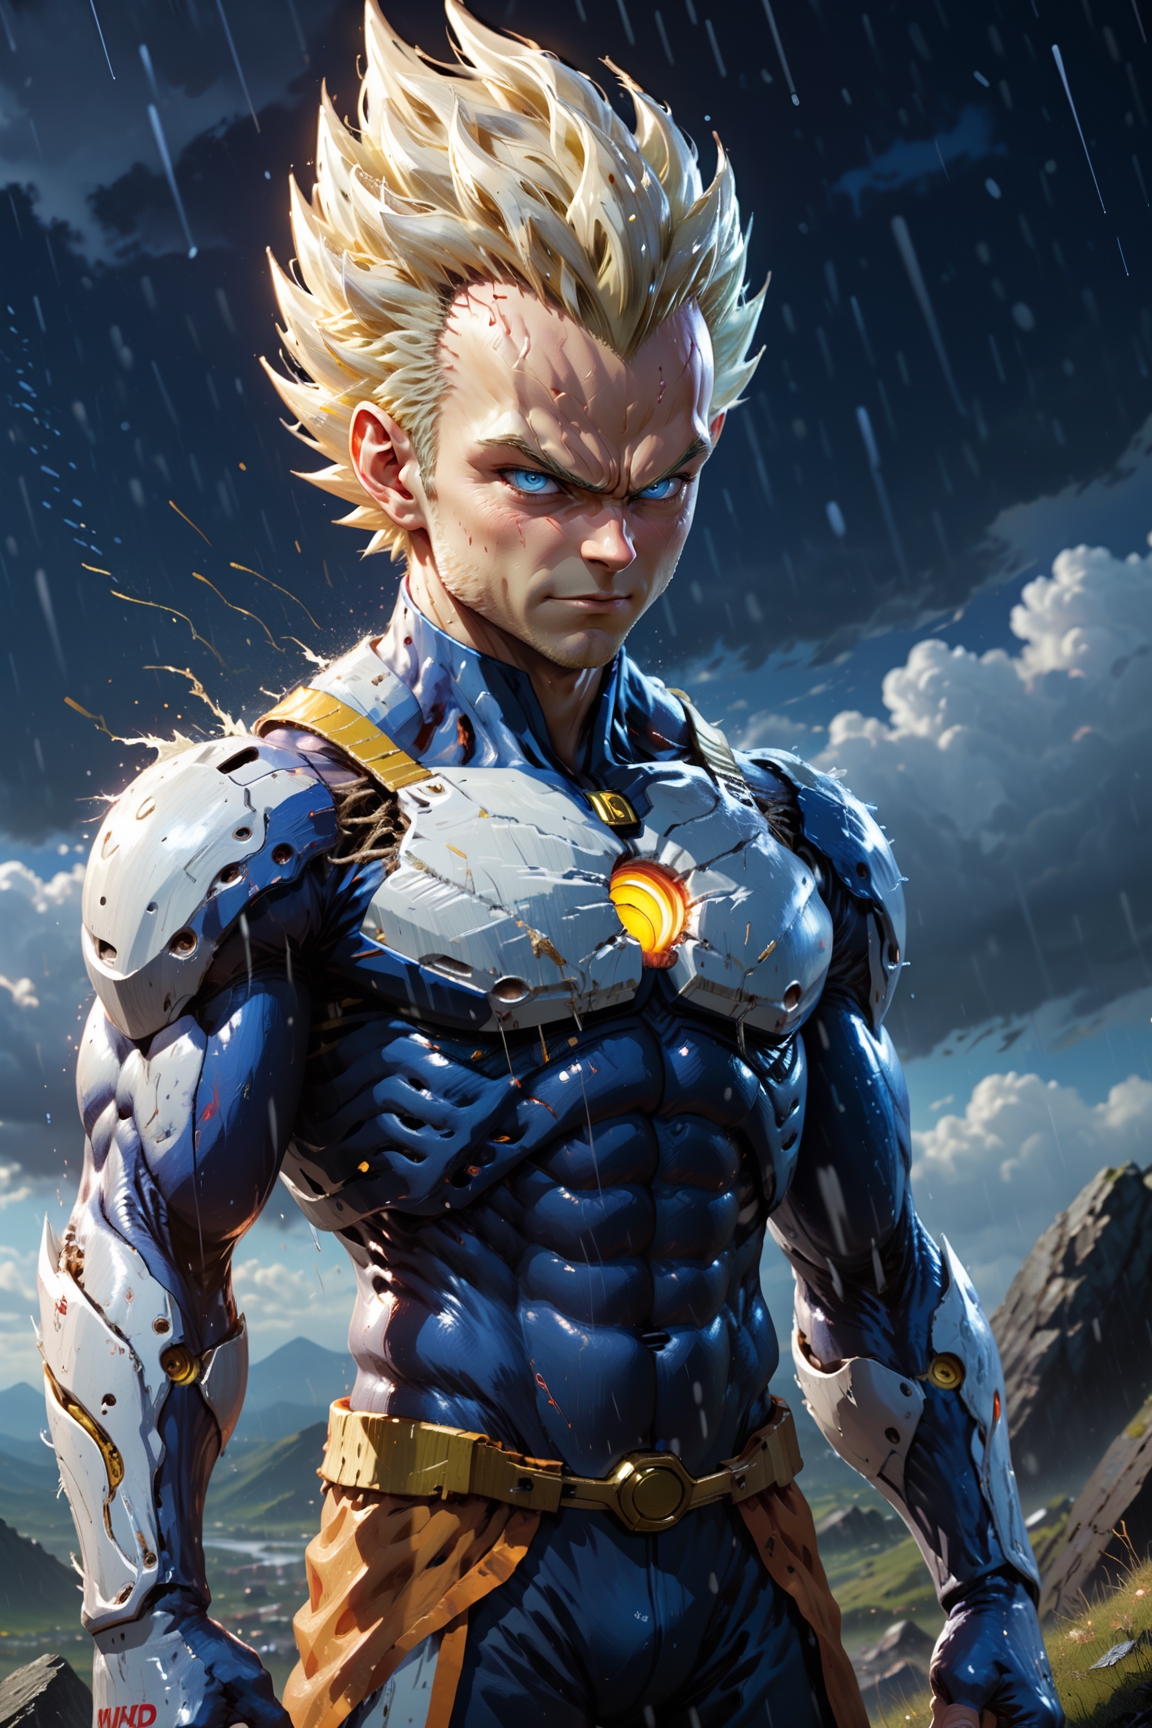 Some awesome Vegeta renders! 